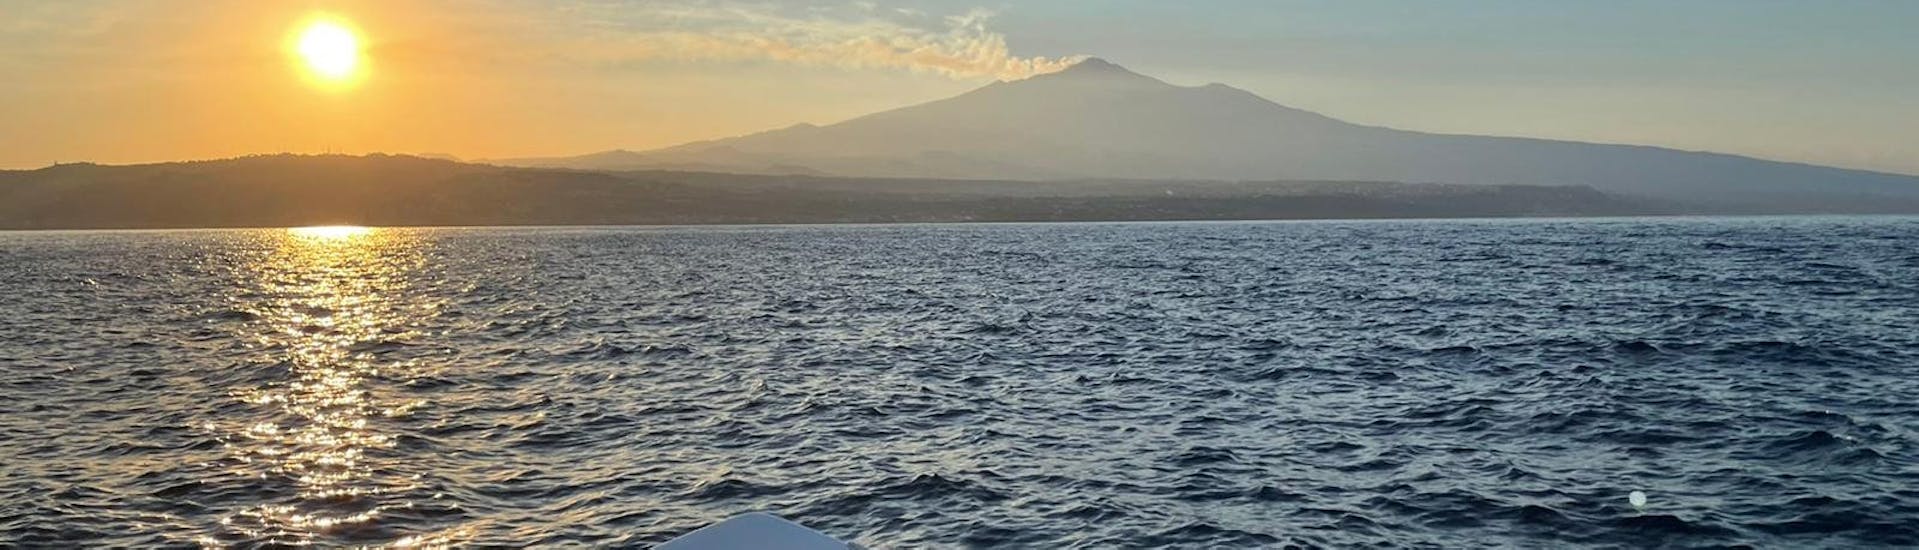 The sunset over Etna seen from the boat of Navigando per Trezza during the Boat Trip from Aci Trezza with Apéritif.